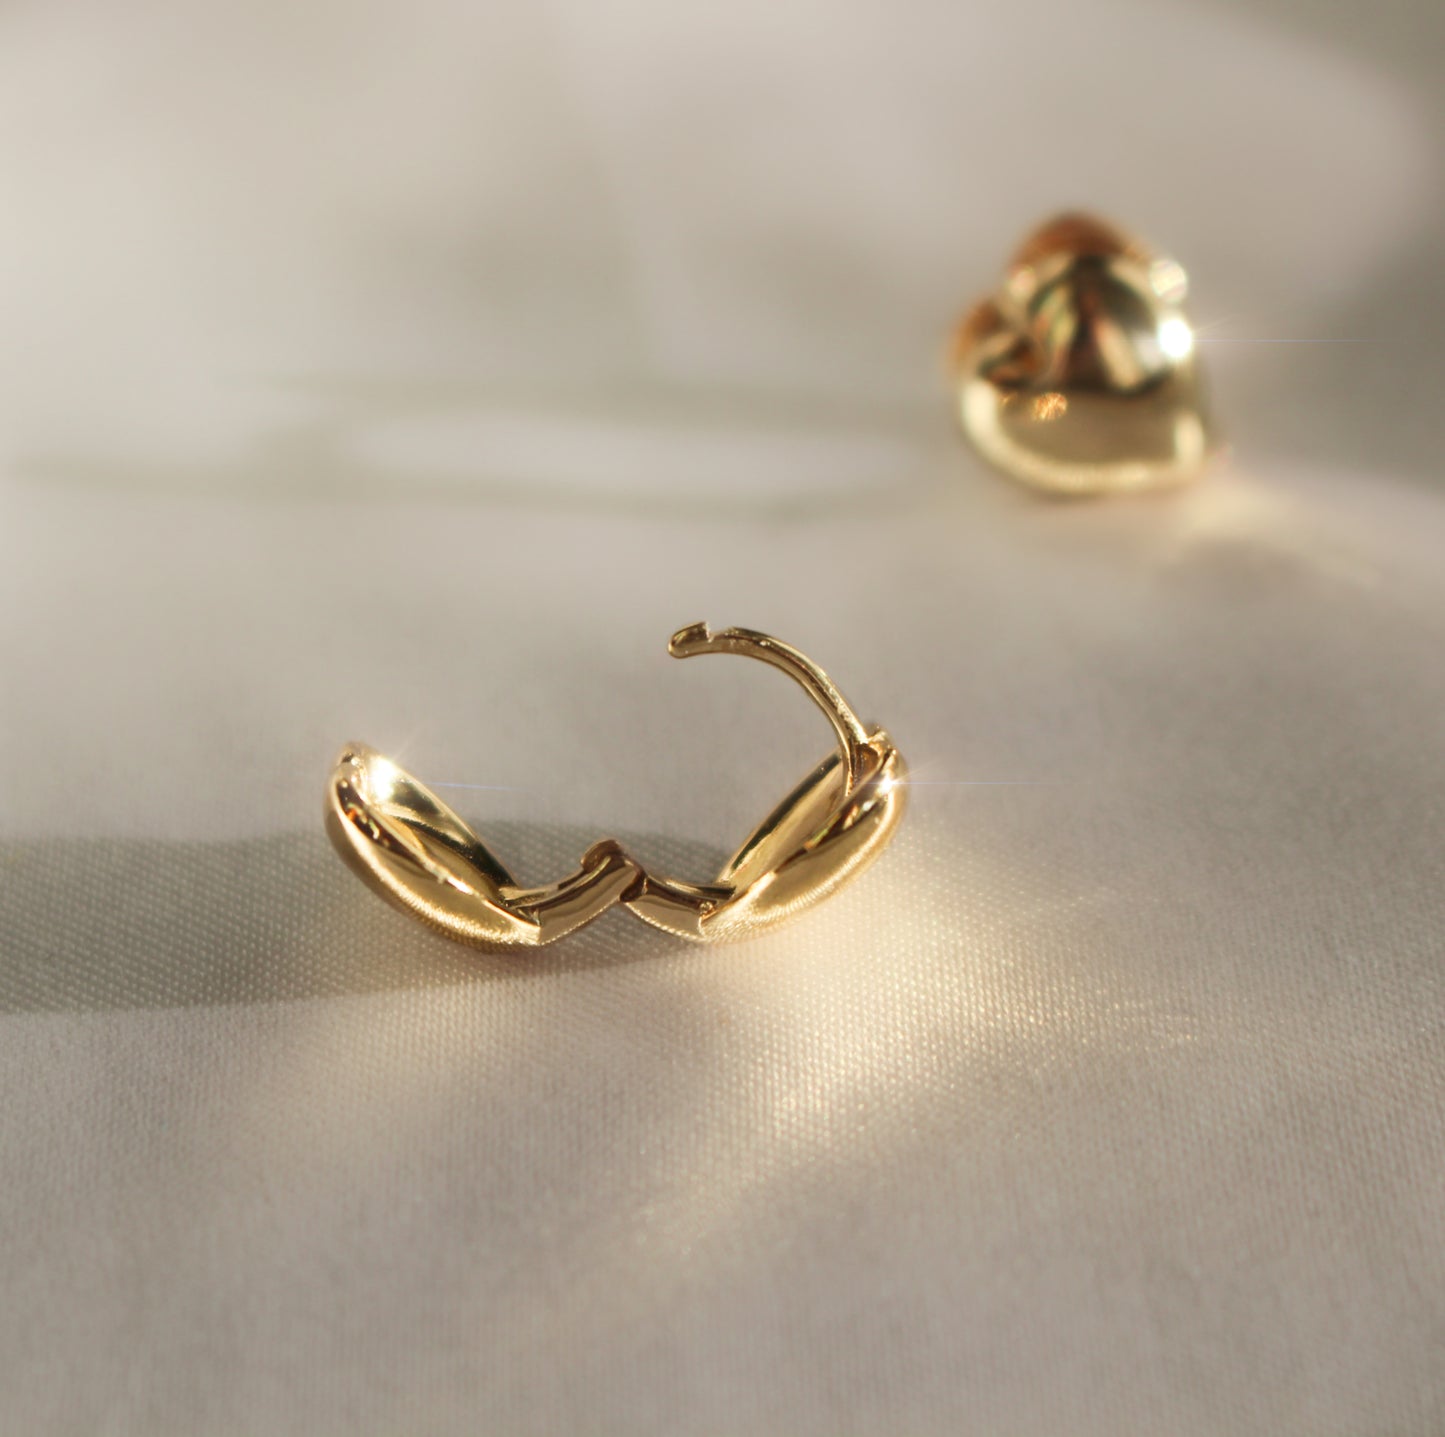 ADORE- Sparkling 14K Gold Tiny Hoop Heart Earrings Studs For Valentine · 12mm · Dainty Simple Huggies · Lightweight · Gold Earrings